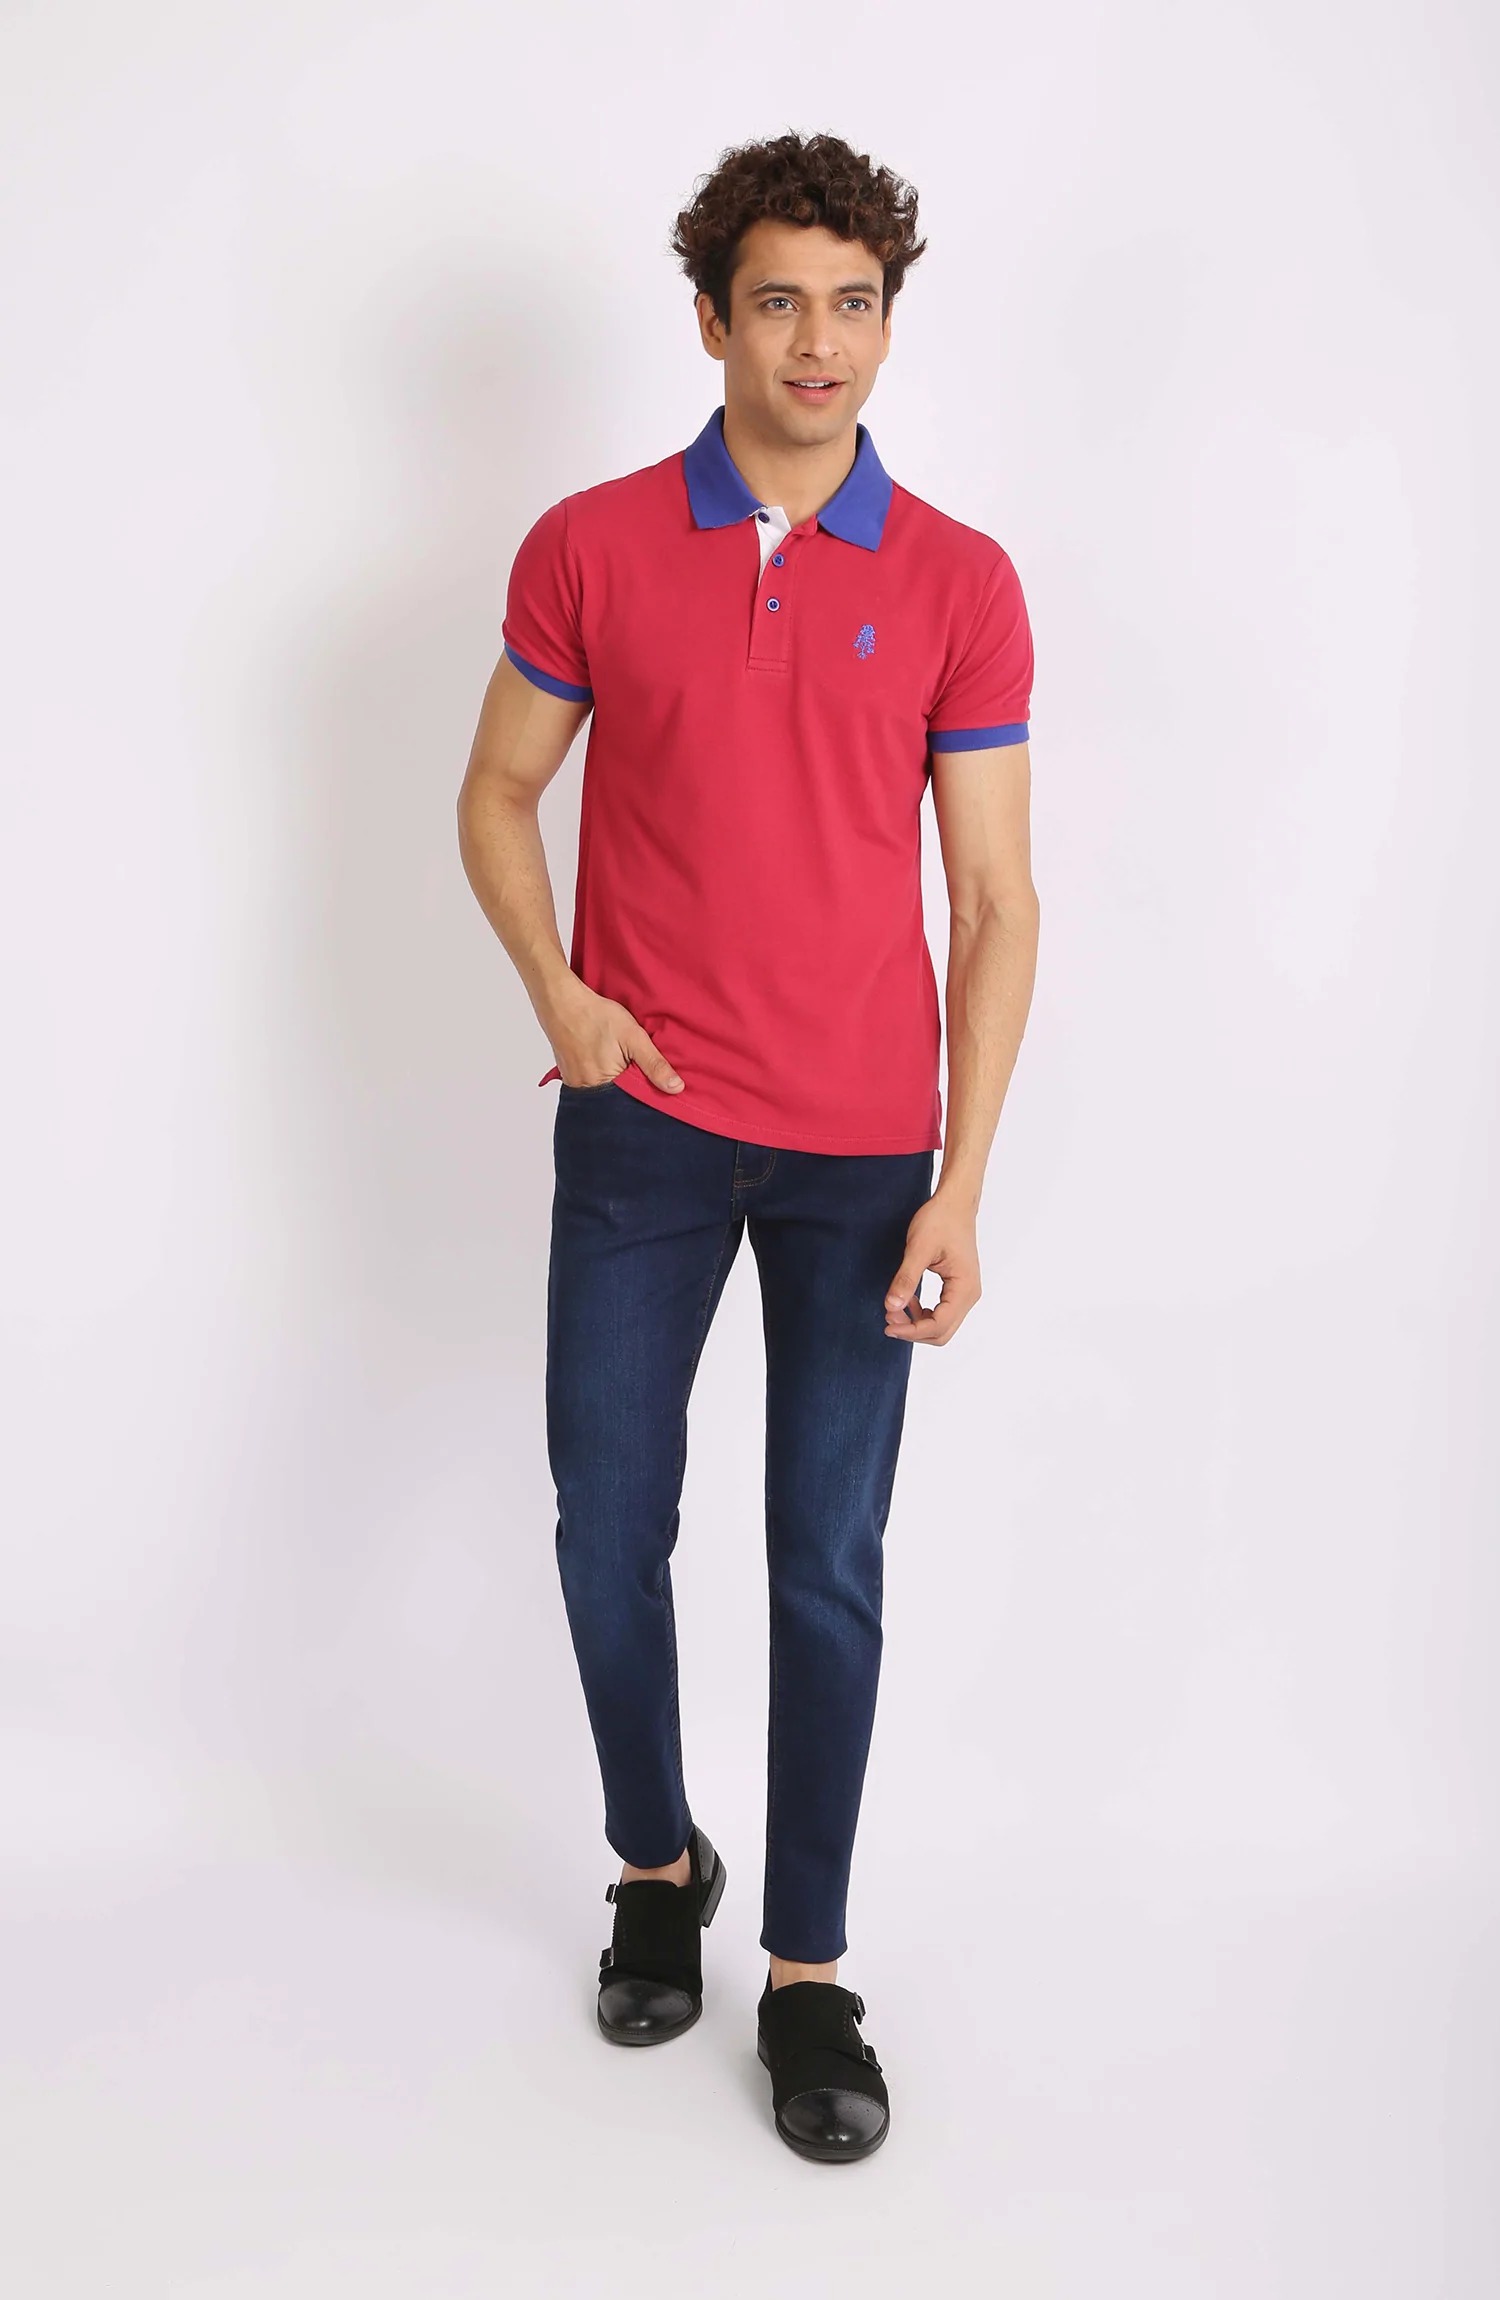 PIQUE KNIT POLO IN RED
